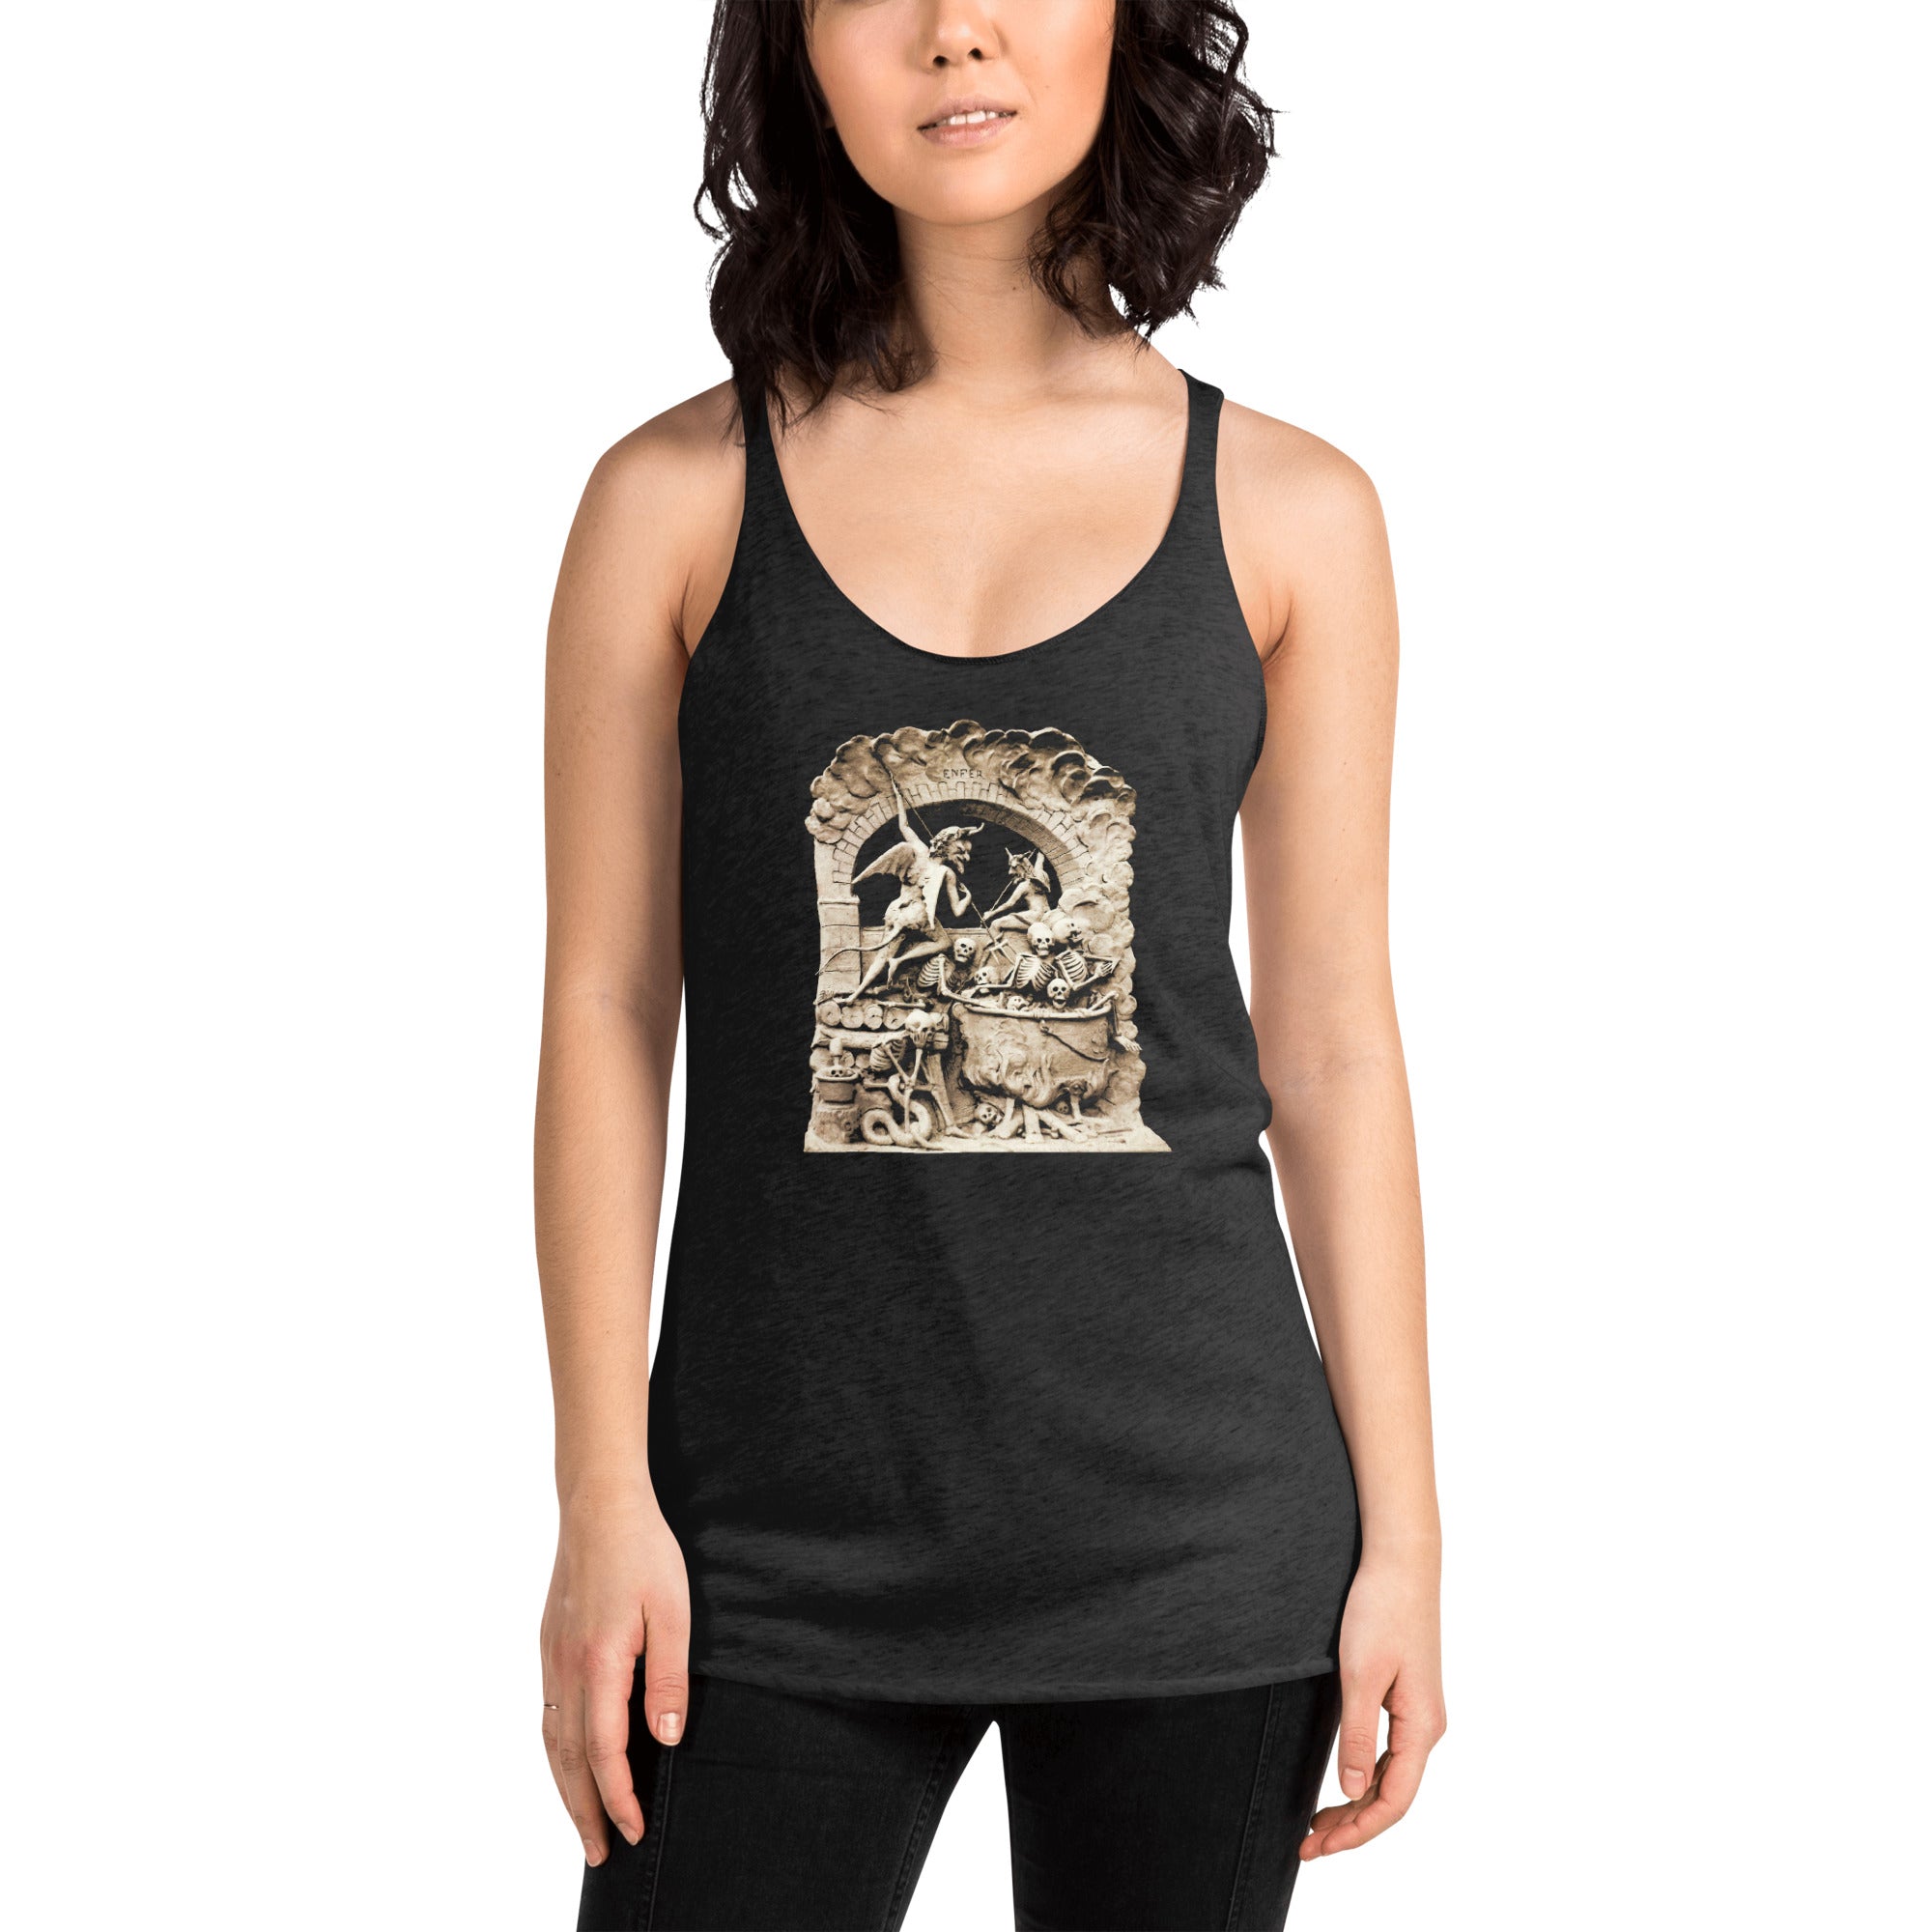 Les Diableries The Pits of Hell and the Devil Women's Racerback Tank Top Shirt - Edge of Life Designs